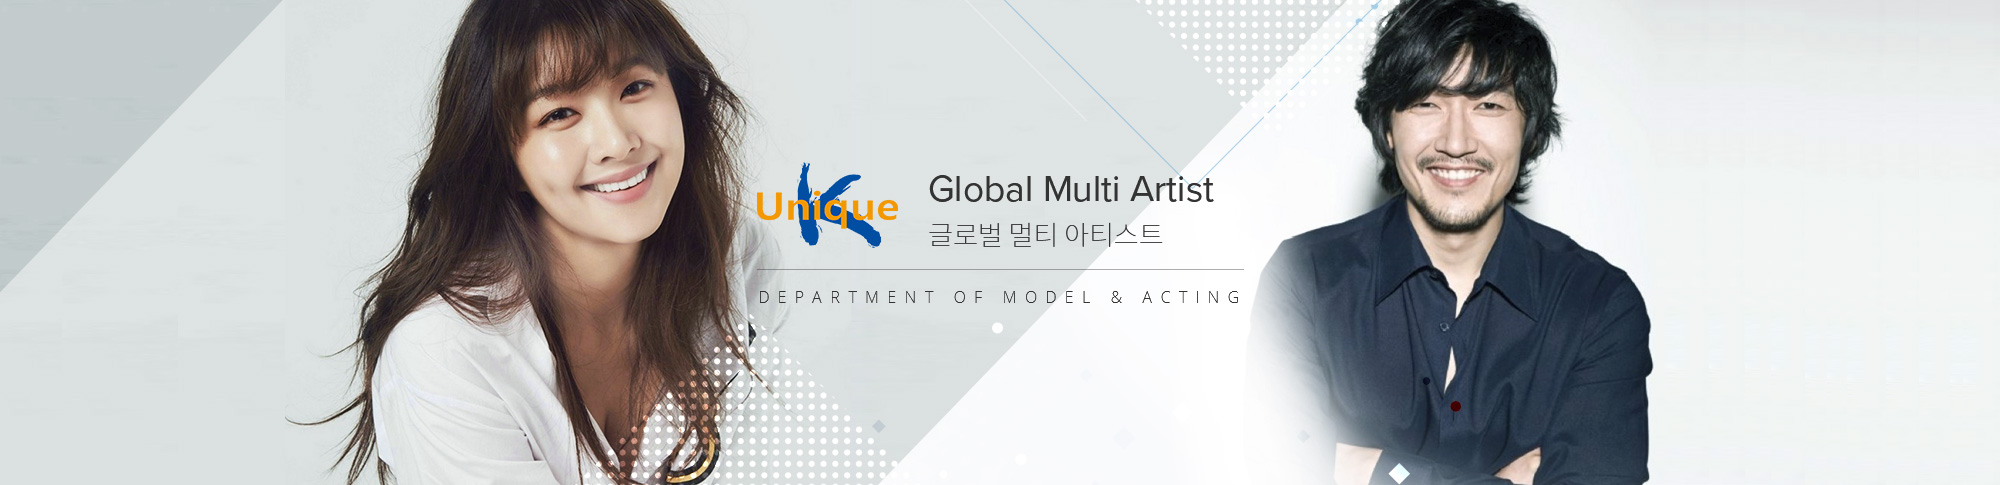 Unique Global Modeltainer 글로벌 모델테이너 DEPARTMENT OF MODEL